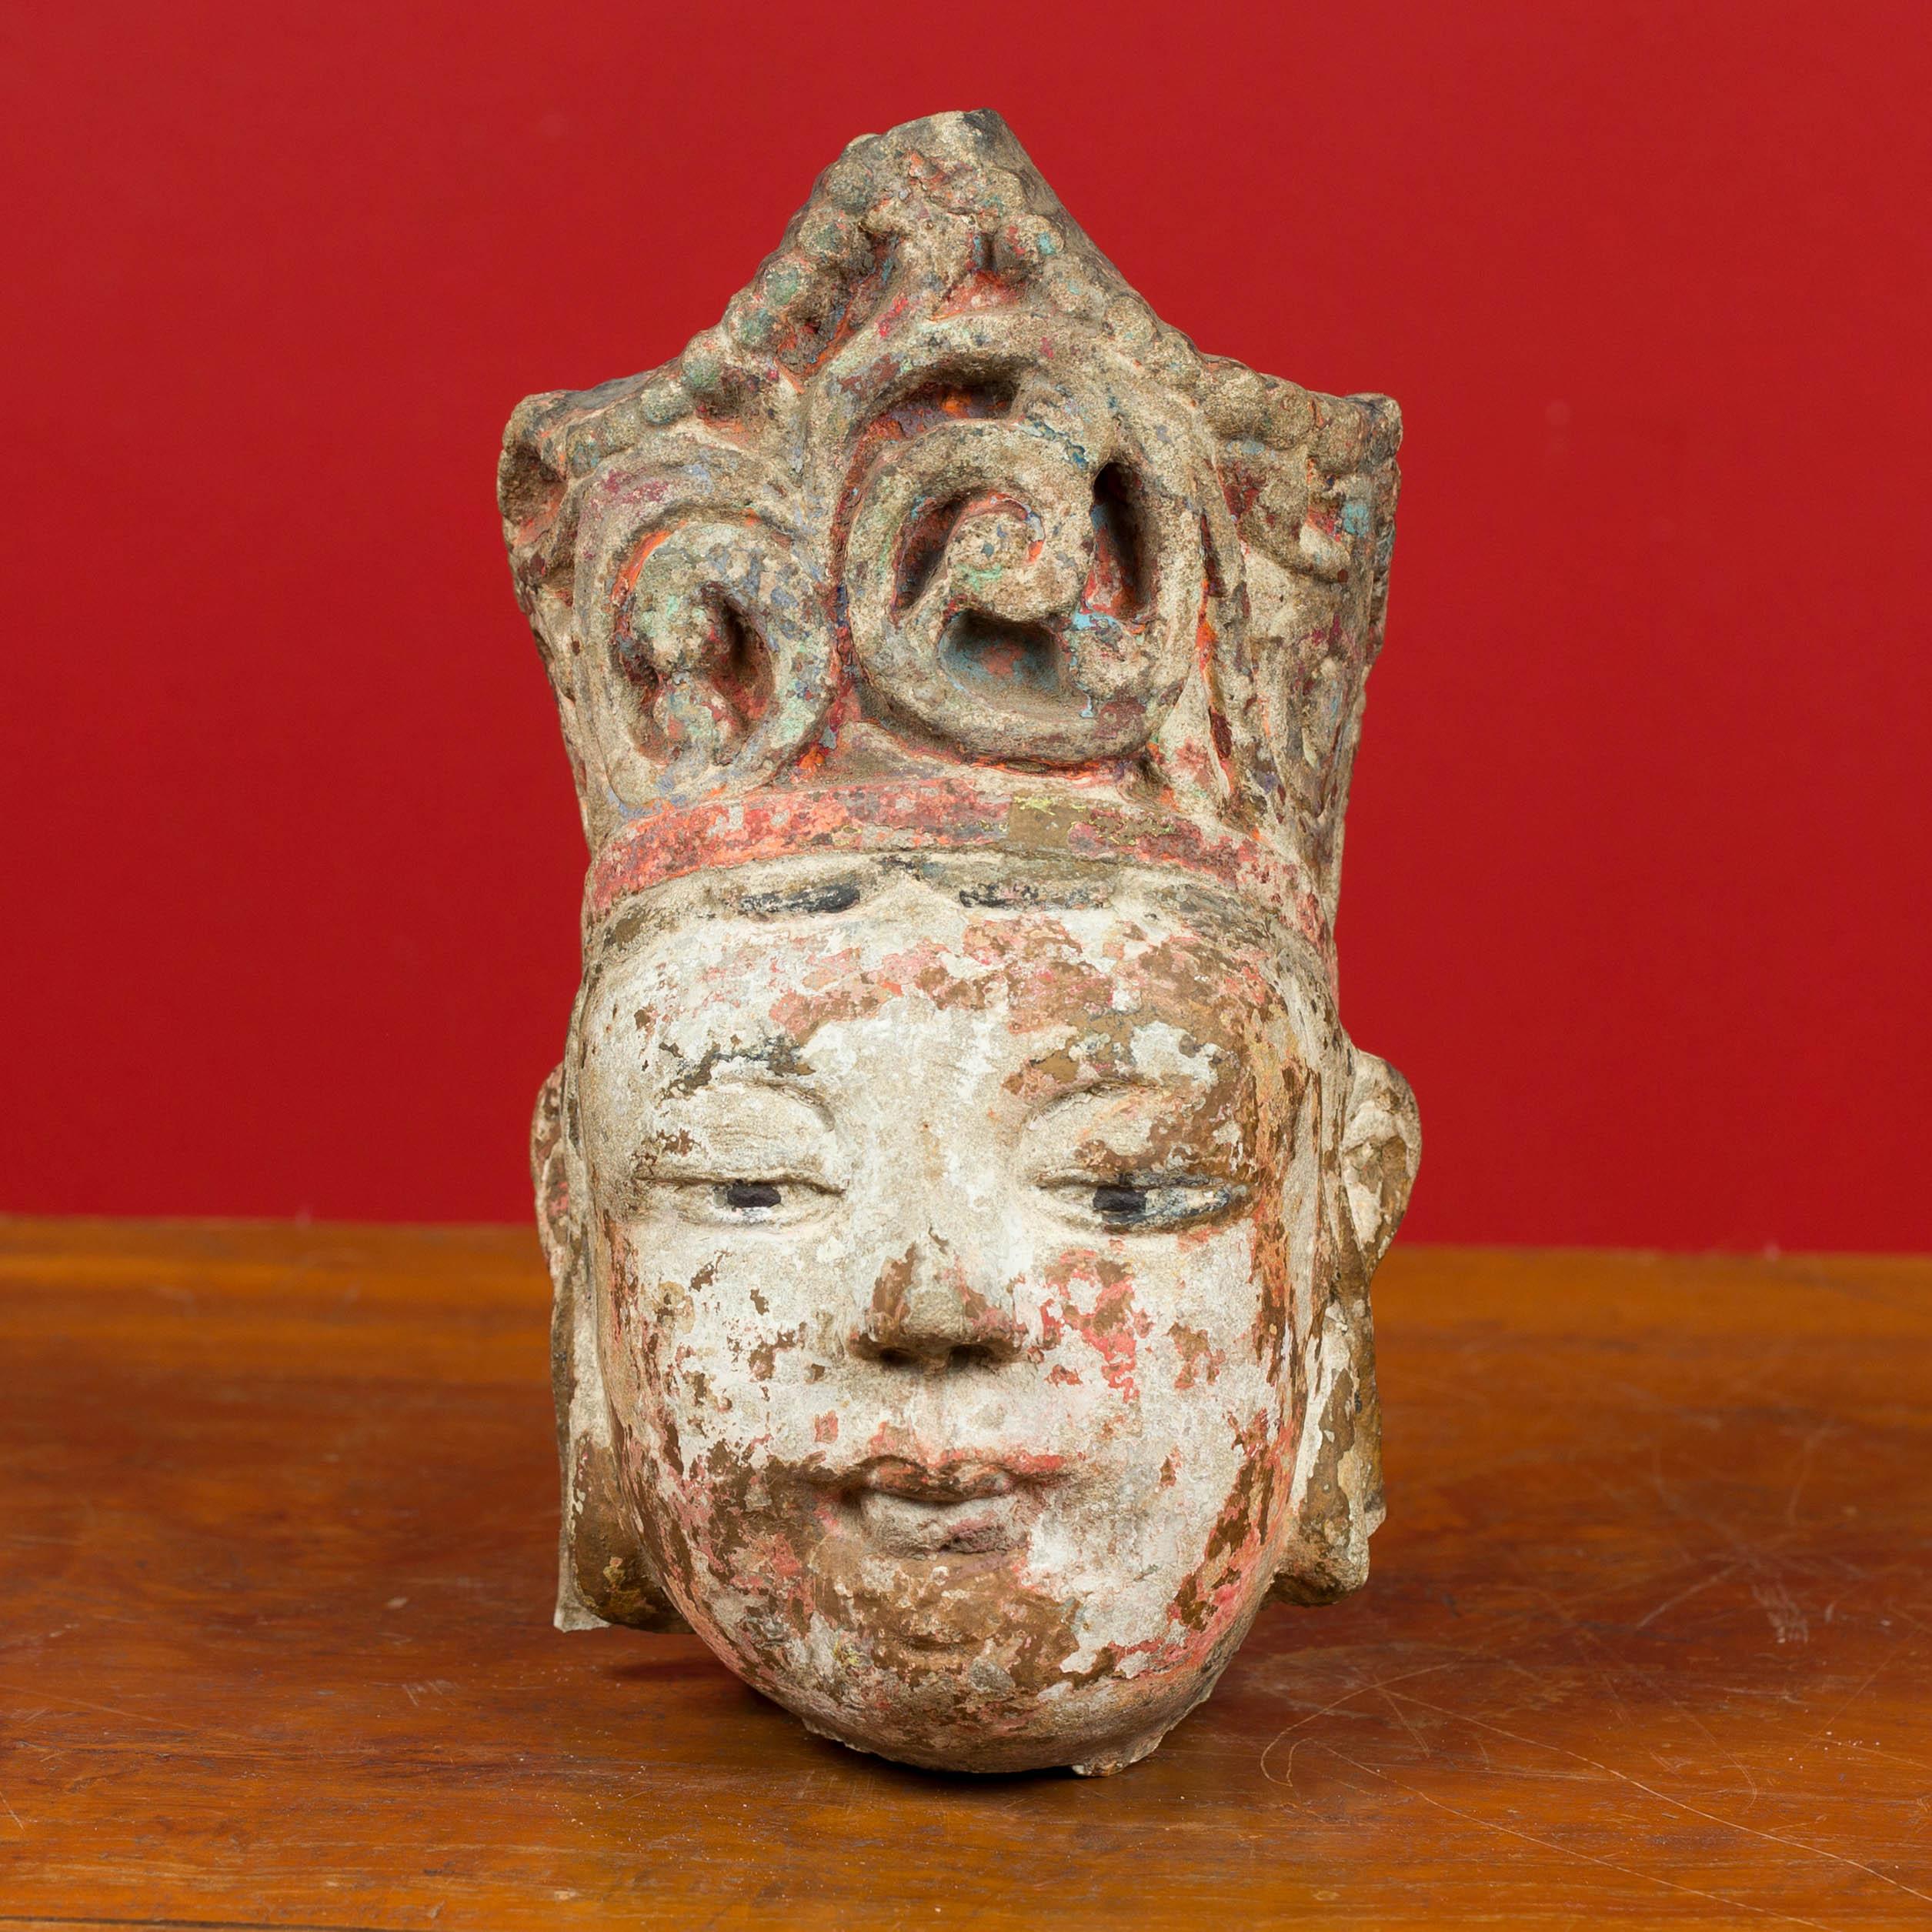 An antique Chinese carved stone court figure head sculpture with original polychromy. Attracting our attention with its tall headdress and remnants of original polychromy, this Chinese sculpture depicts a court figure. Unfinished in the back, the